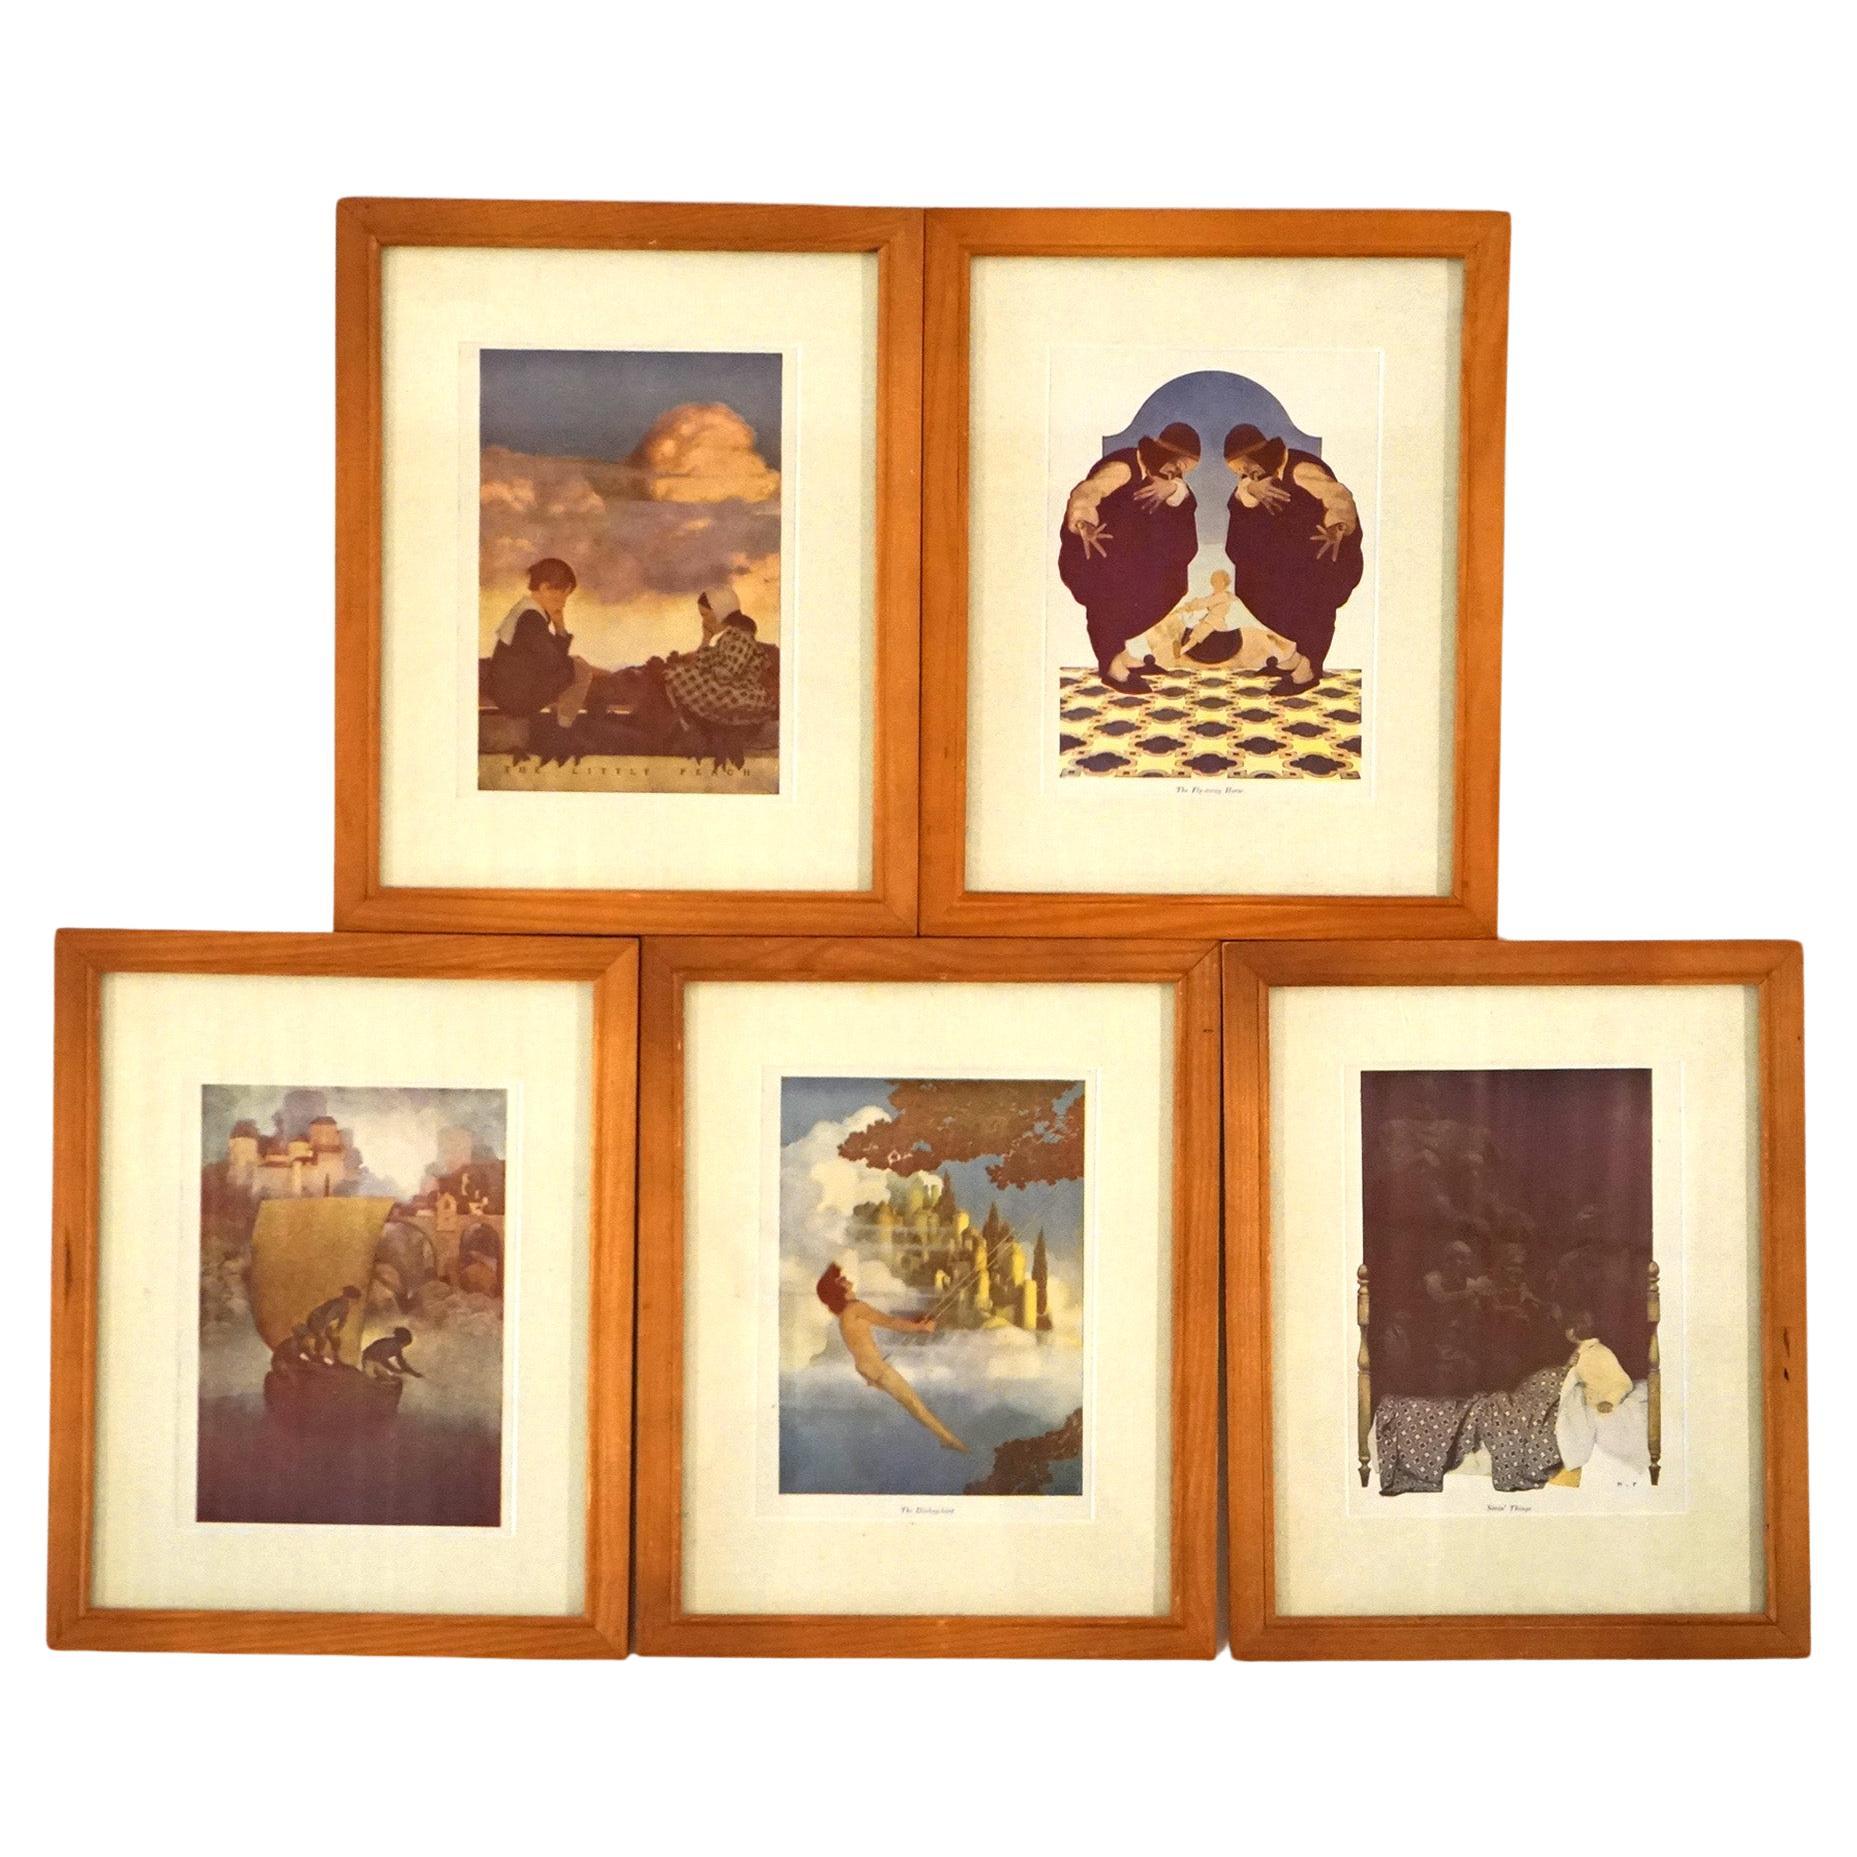 Five Art Deco Maxfield Parrish Bookplates, Framed, C1920 For Sale